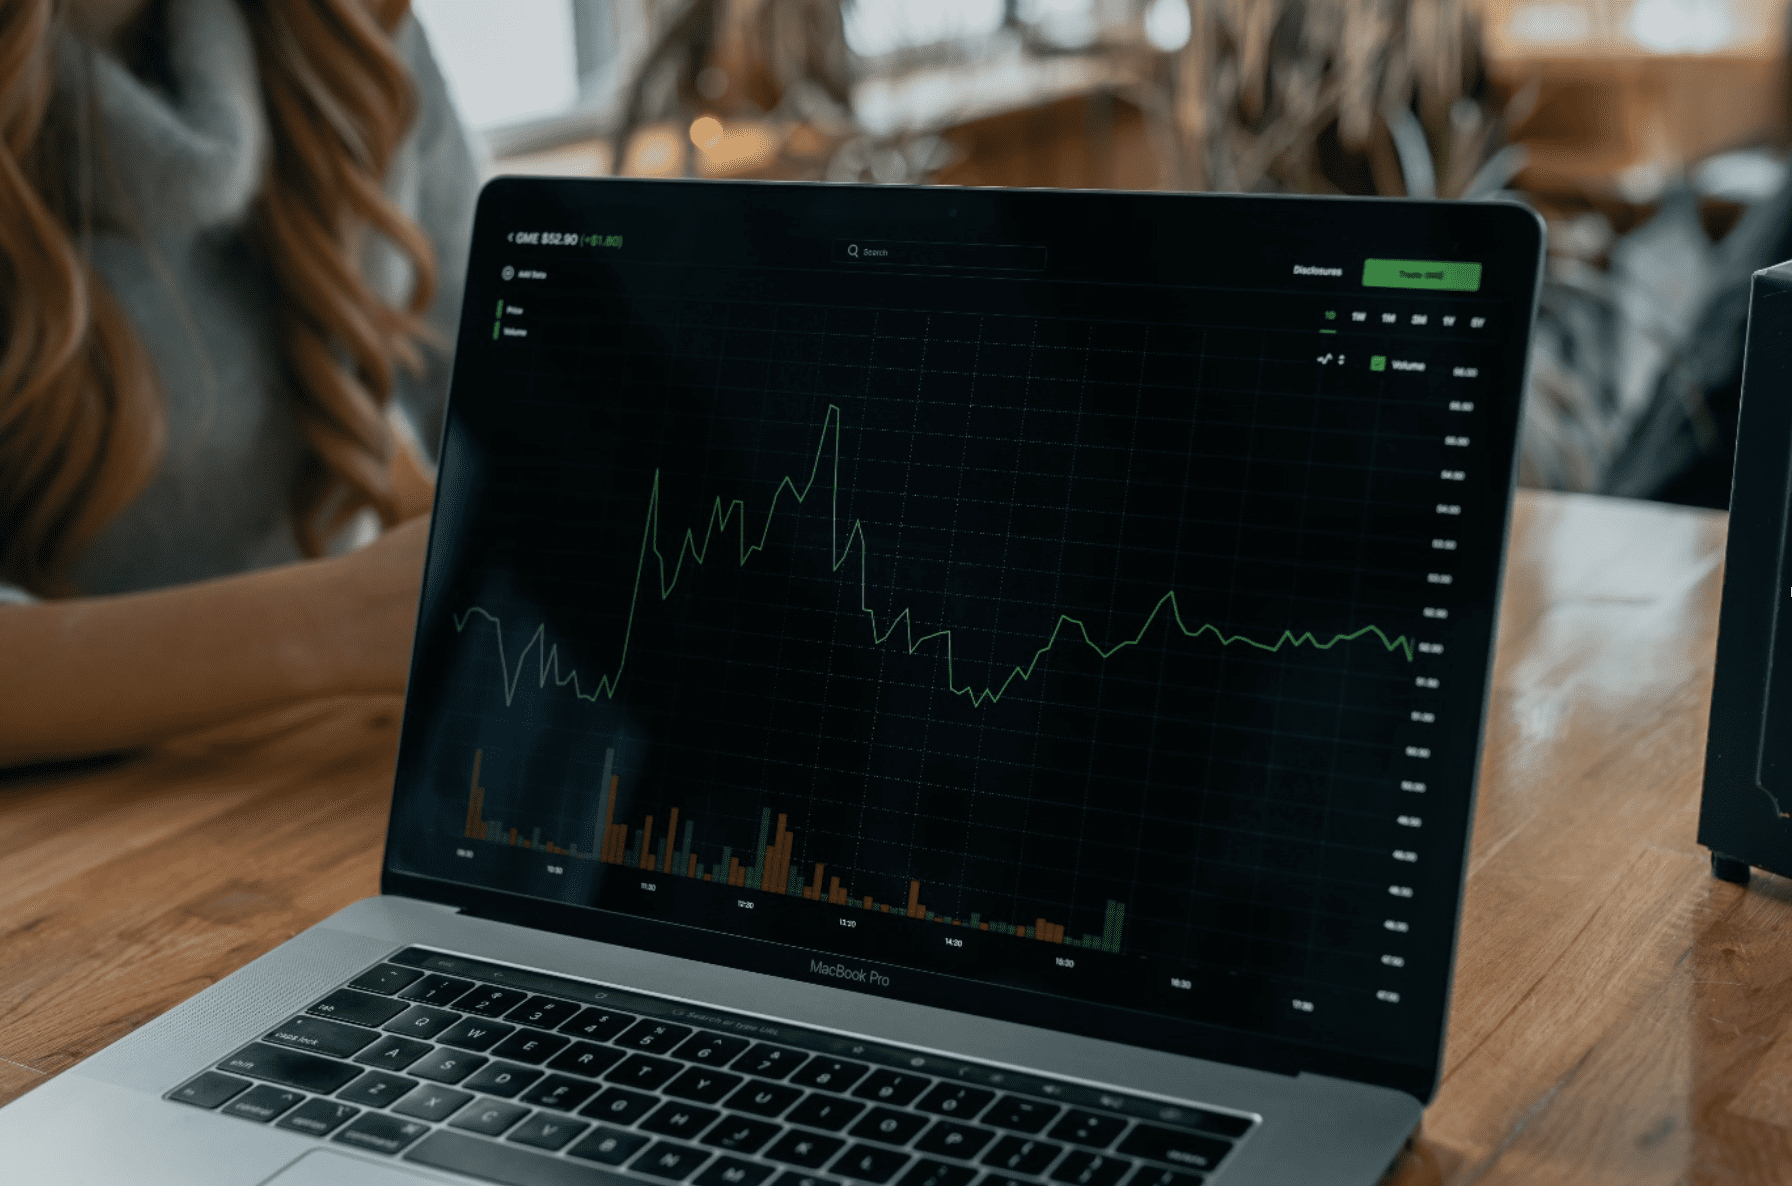 What you should need to know about the MT4 trading platform